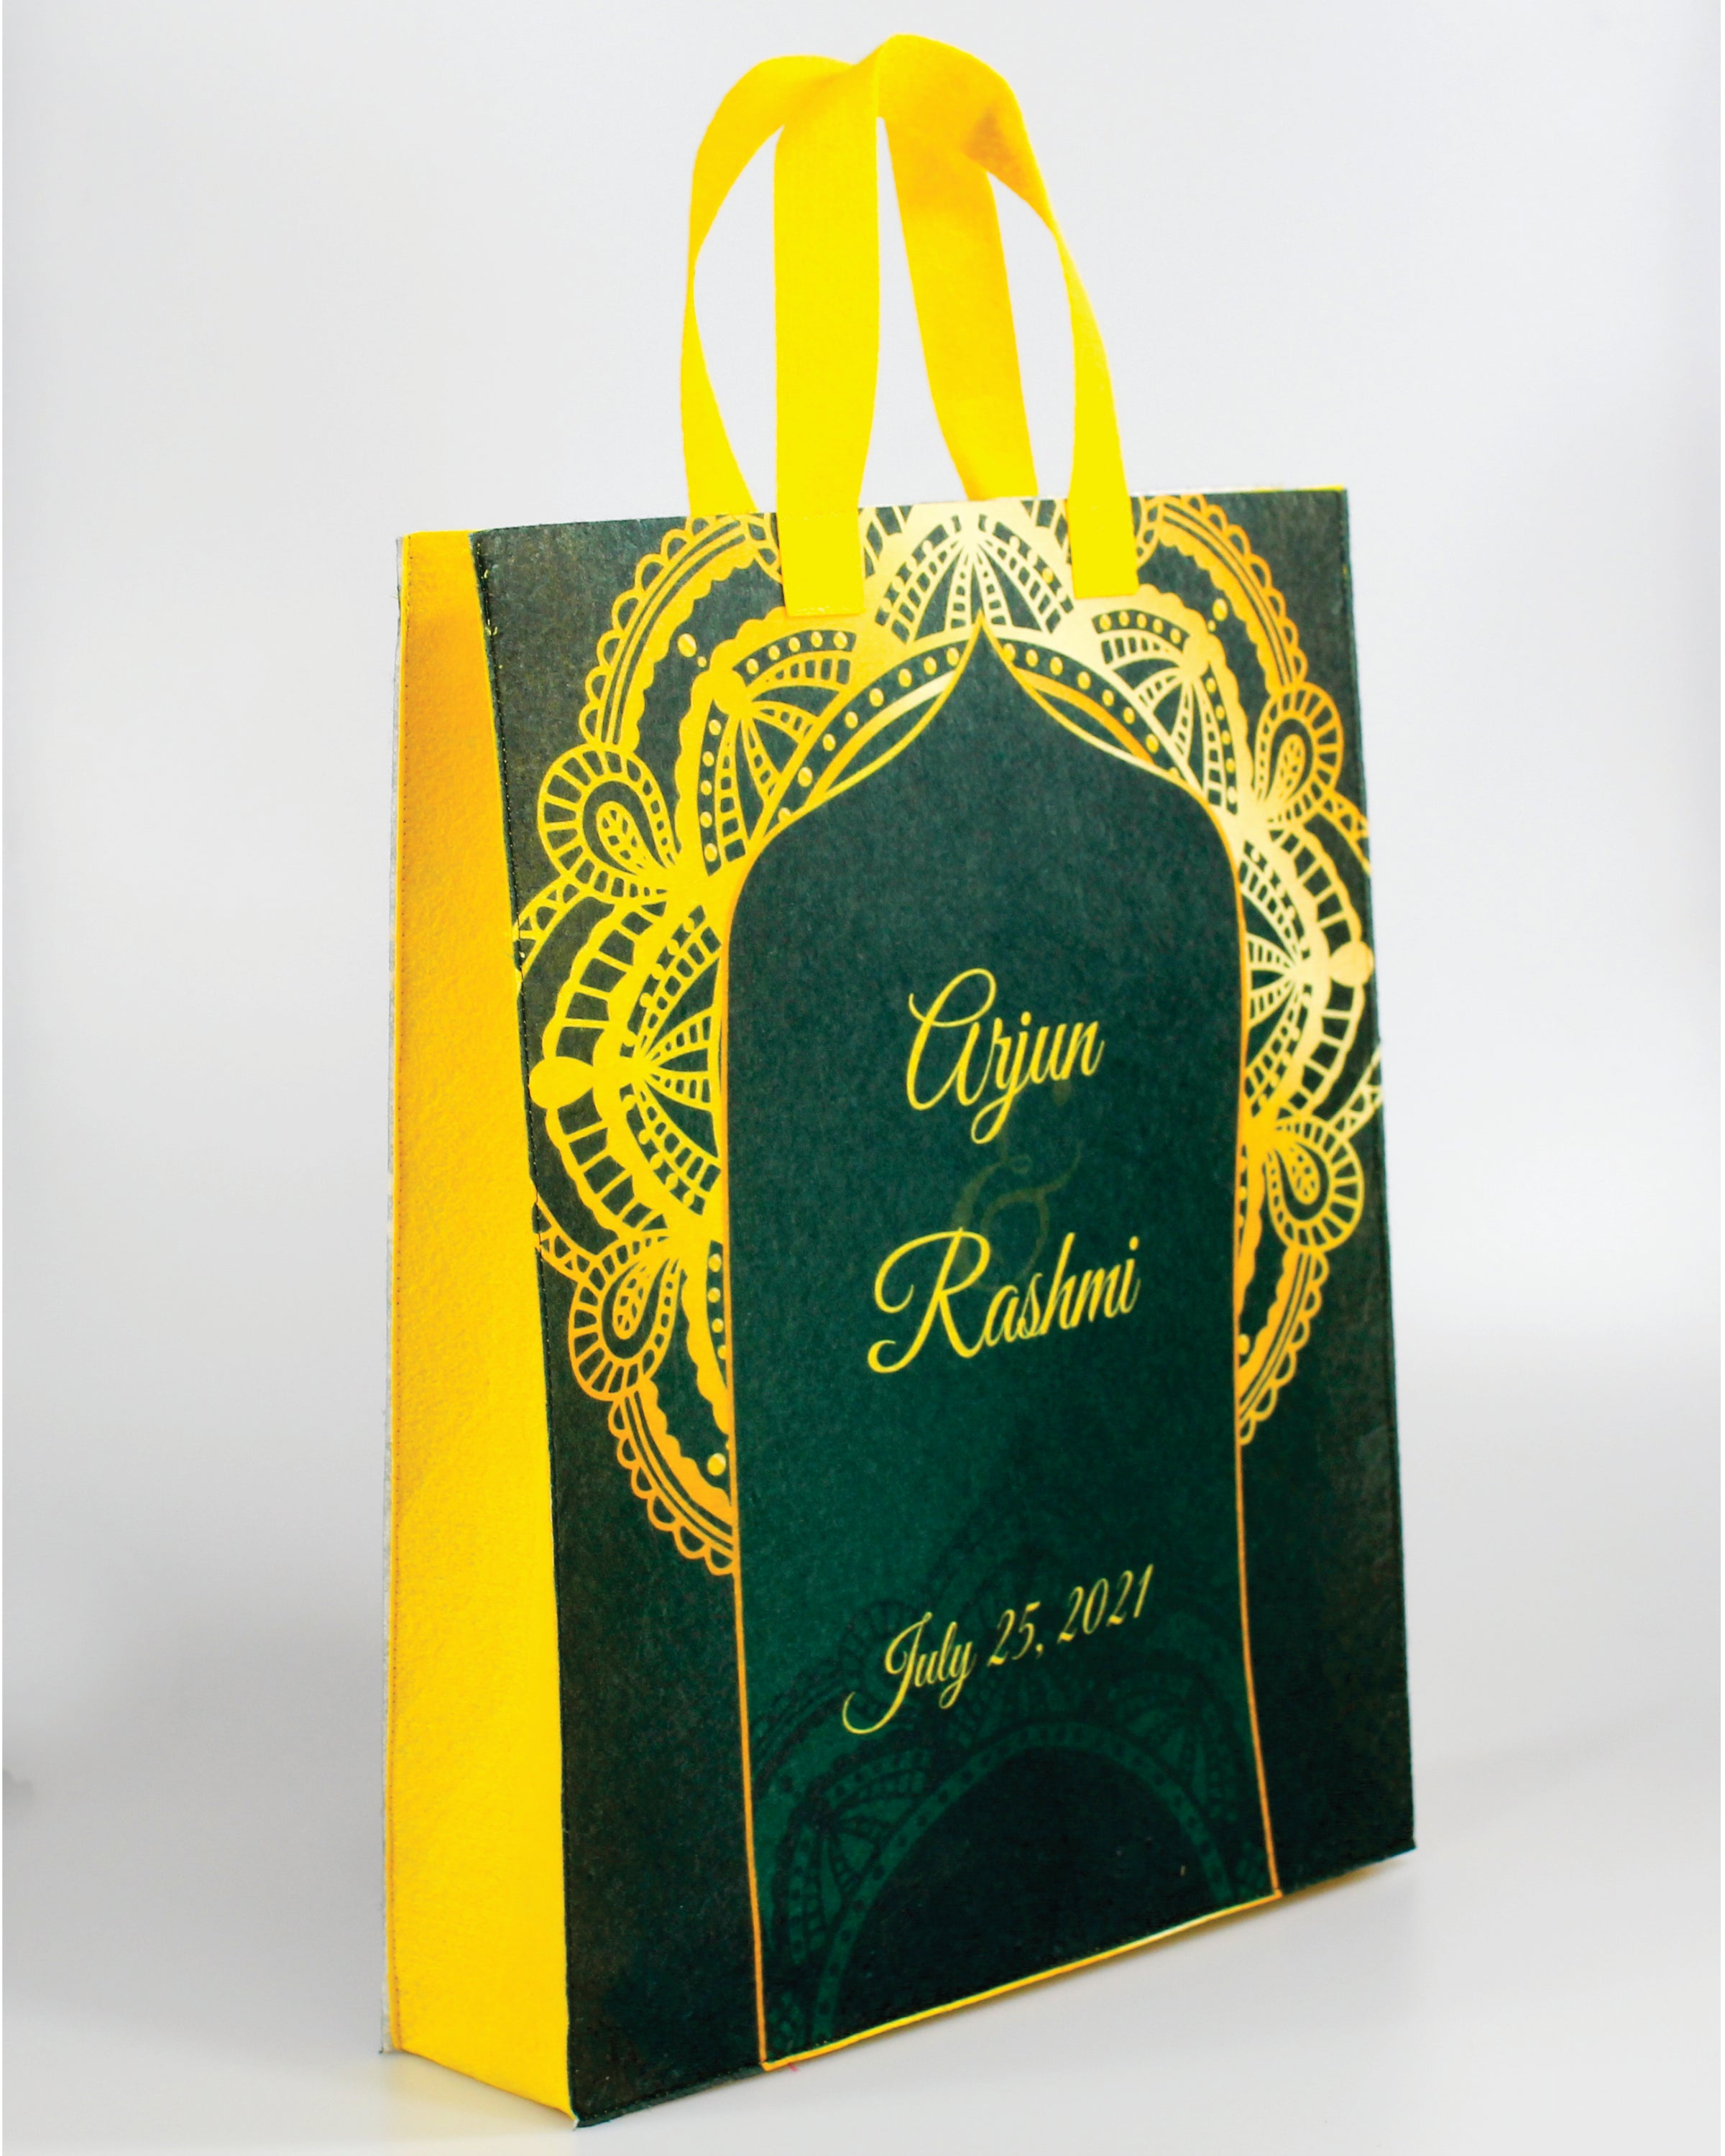 22700 Event Gift Bags Stock Photos Pictures  RoyaltyFree Images   iStock